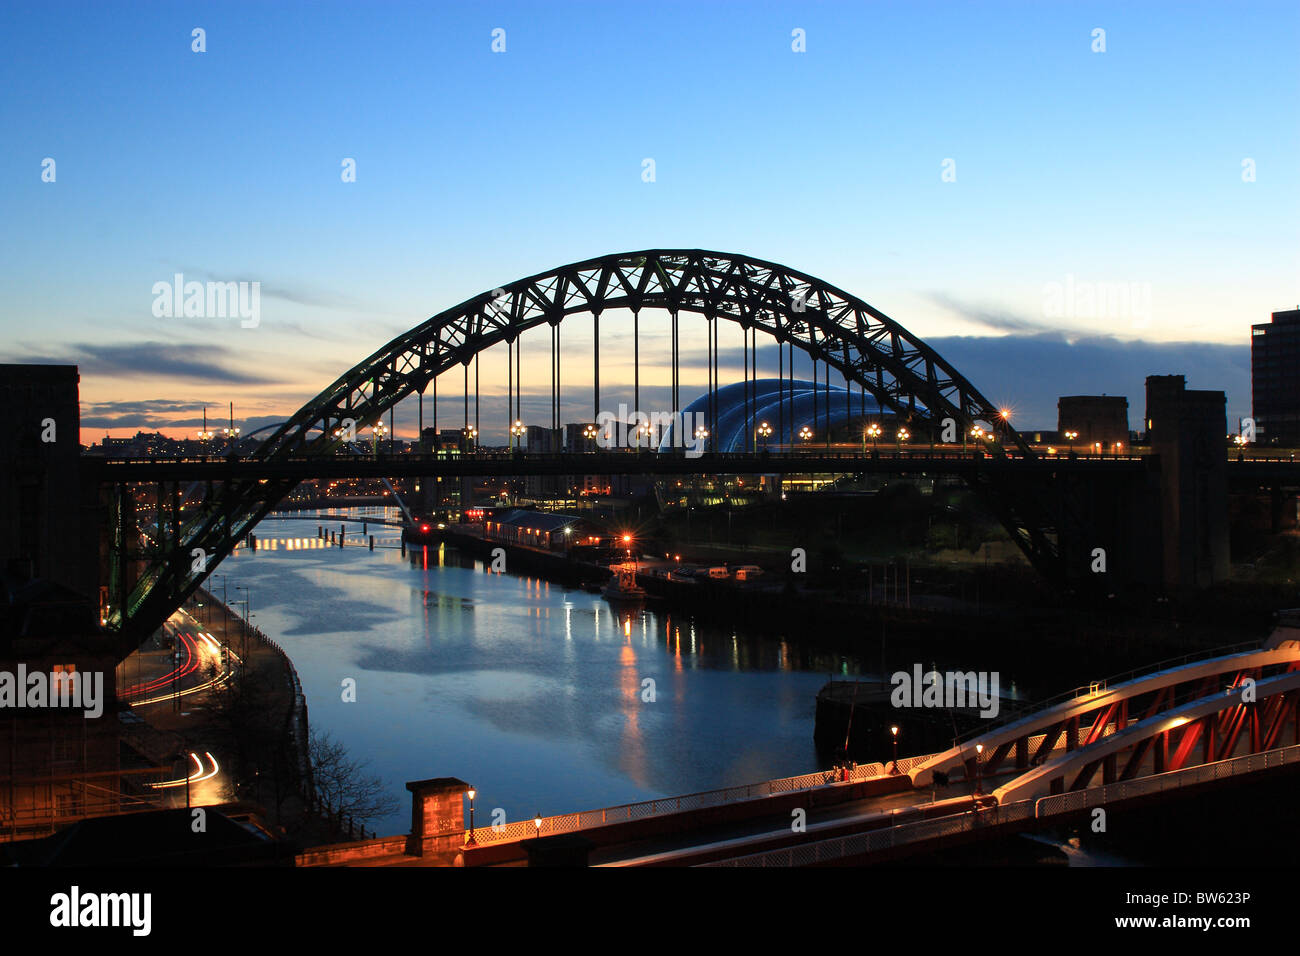 A view of the River Tyne at sunrise showing the Tyne Bridge and Sage Centre. Newcastle, Tyne and Wear. Stock Photo